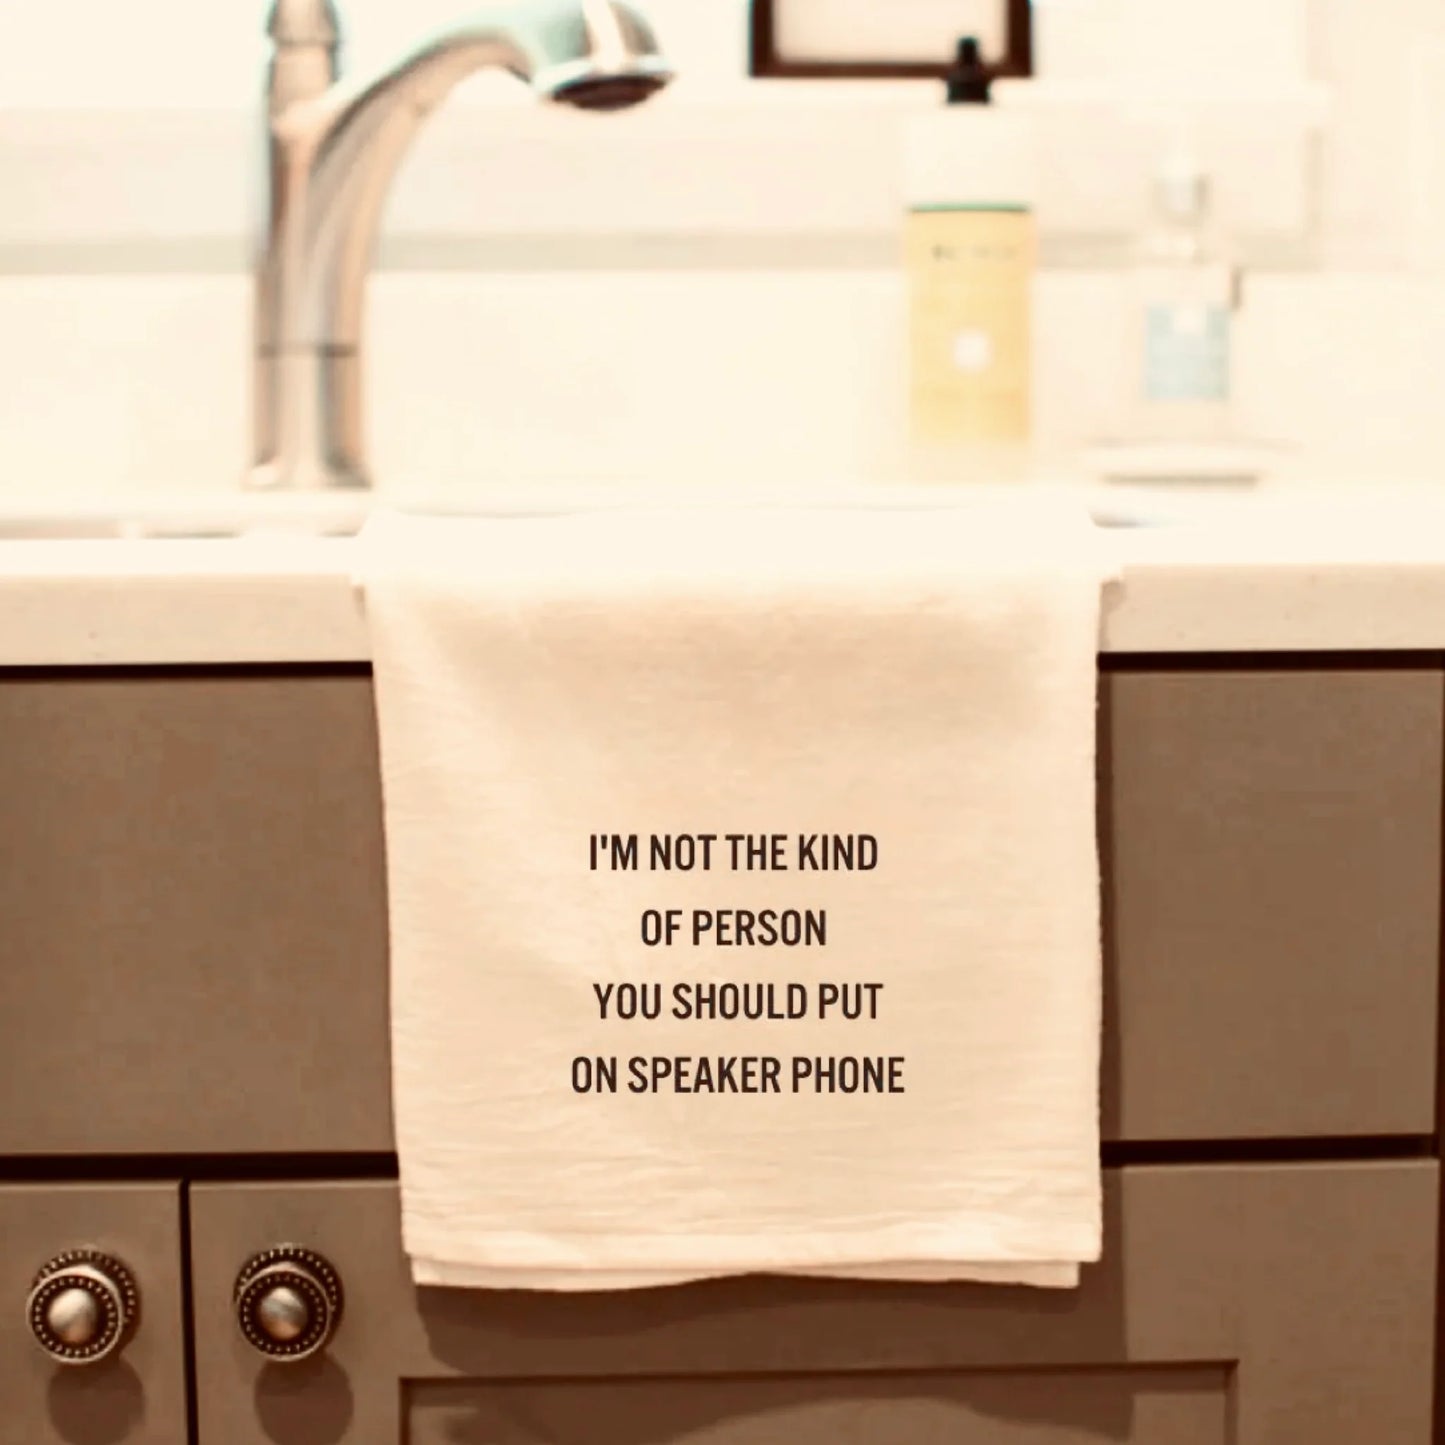 "I'm Not The Kind Of Person You Should Put On Speaker Phone" - Tea Towel